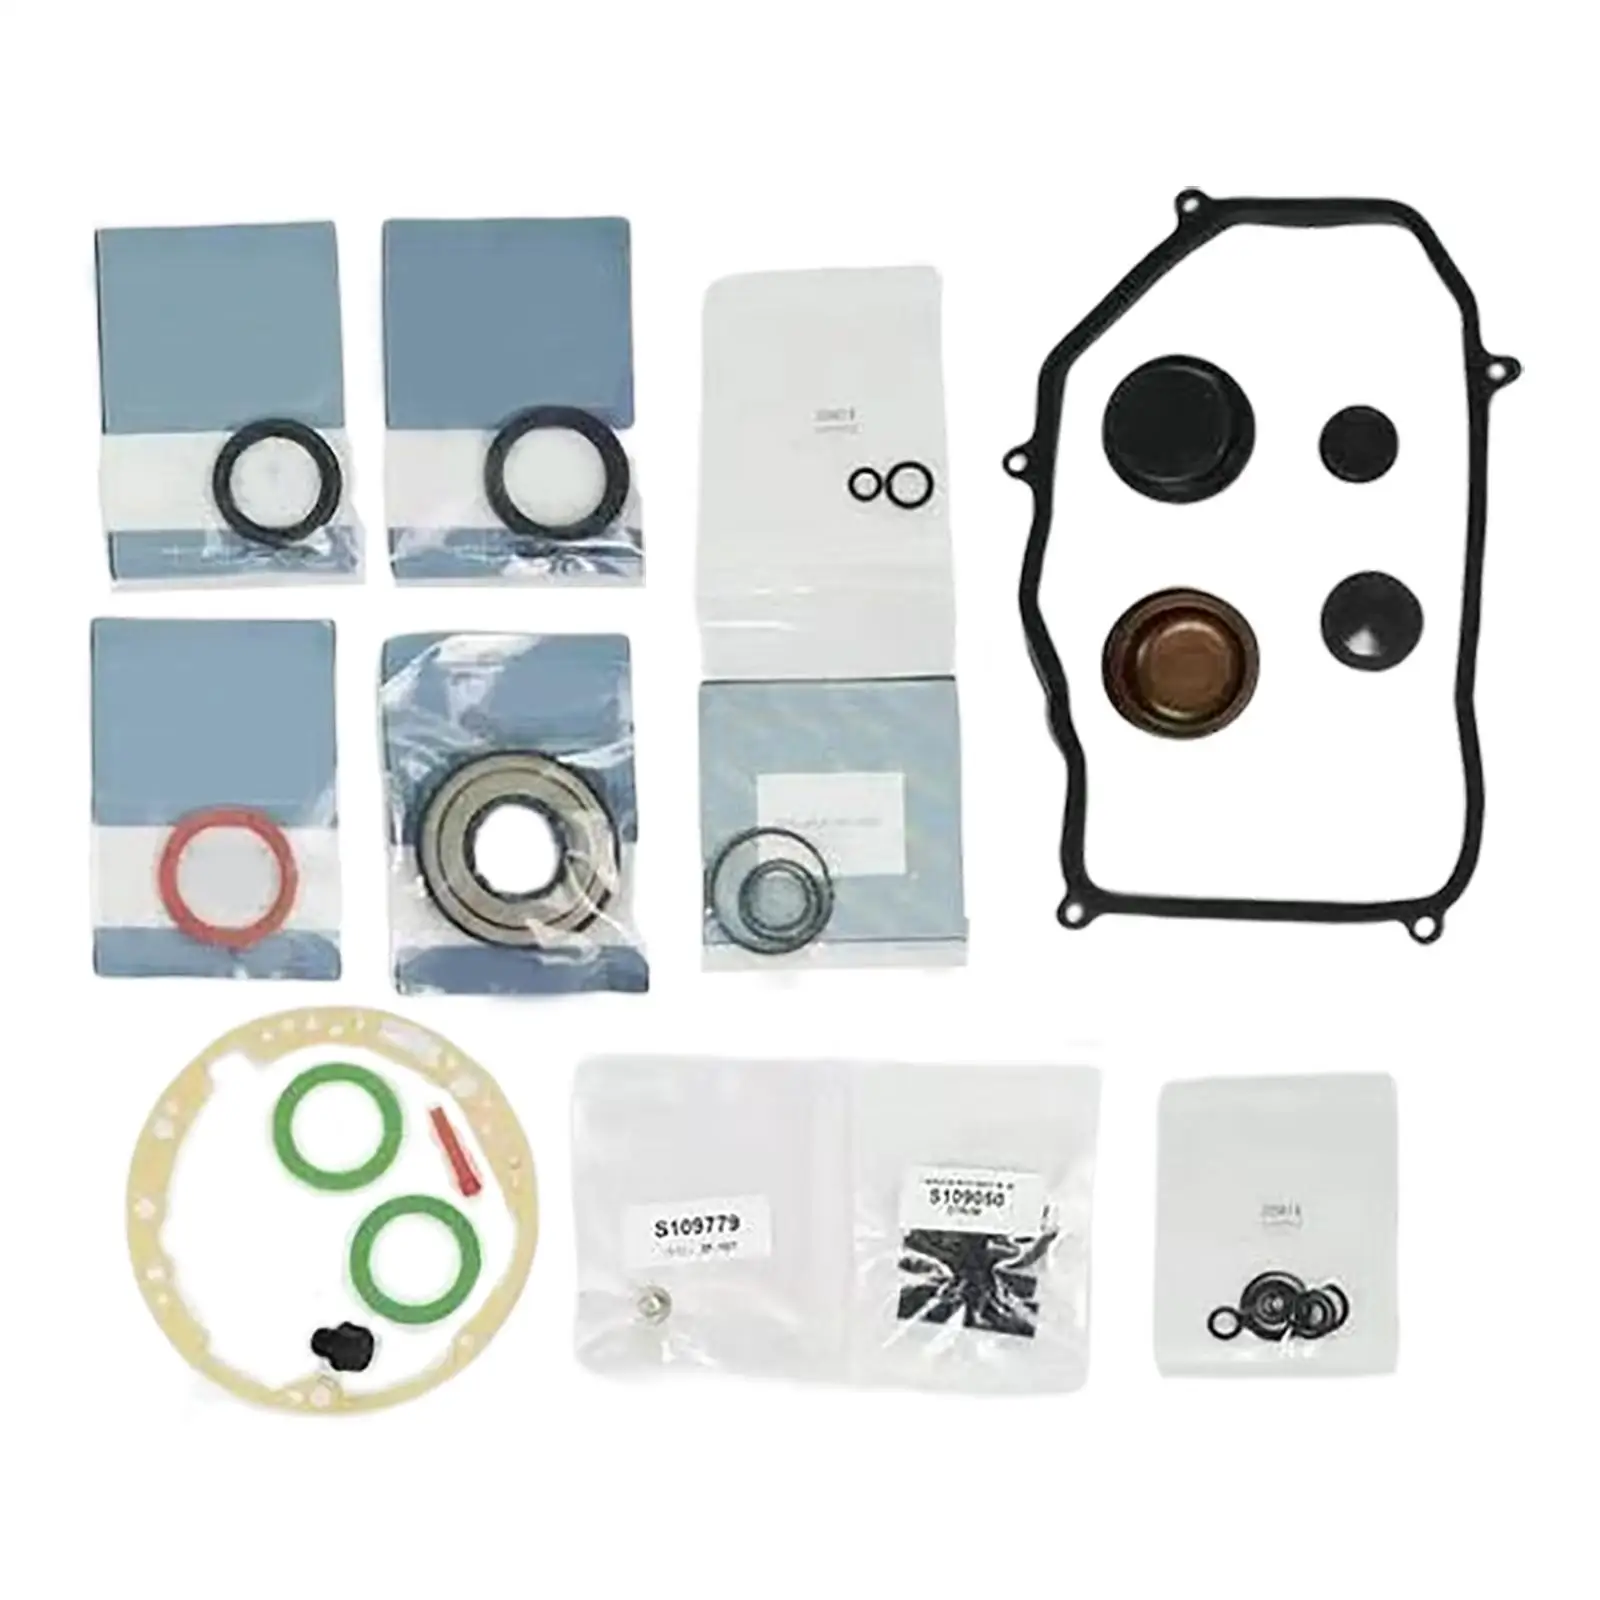 Automatic 01M 4 Speed Transmission Seal Rebuild Kit Equipment Metal Replacement for VW Trans MK4 MK3 01M 398 001 Auto Parts